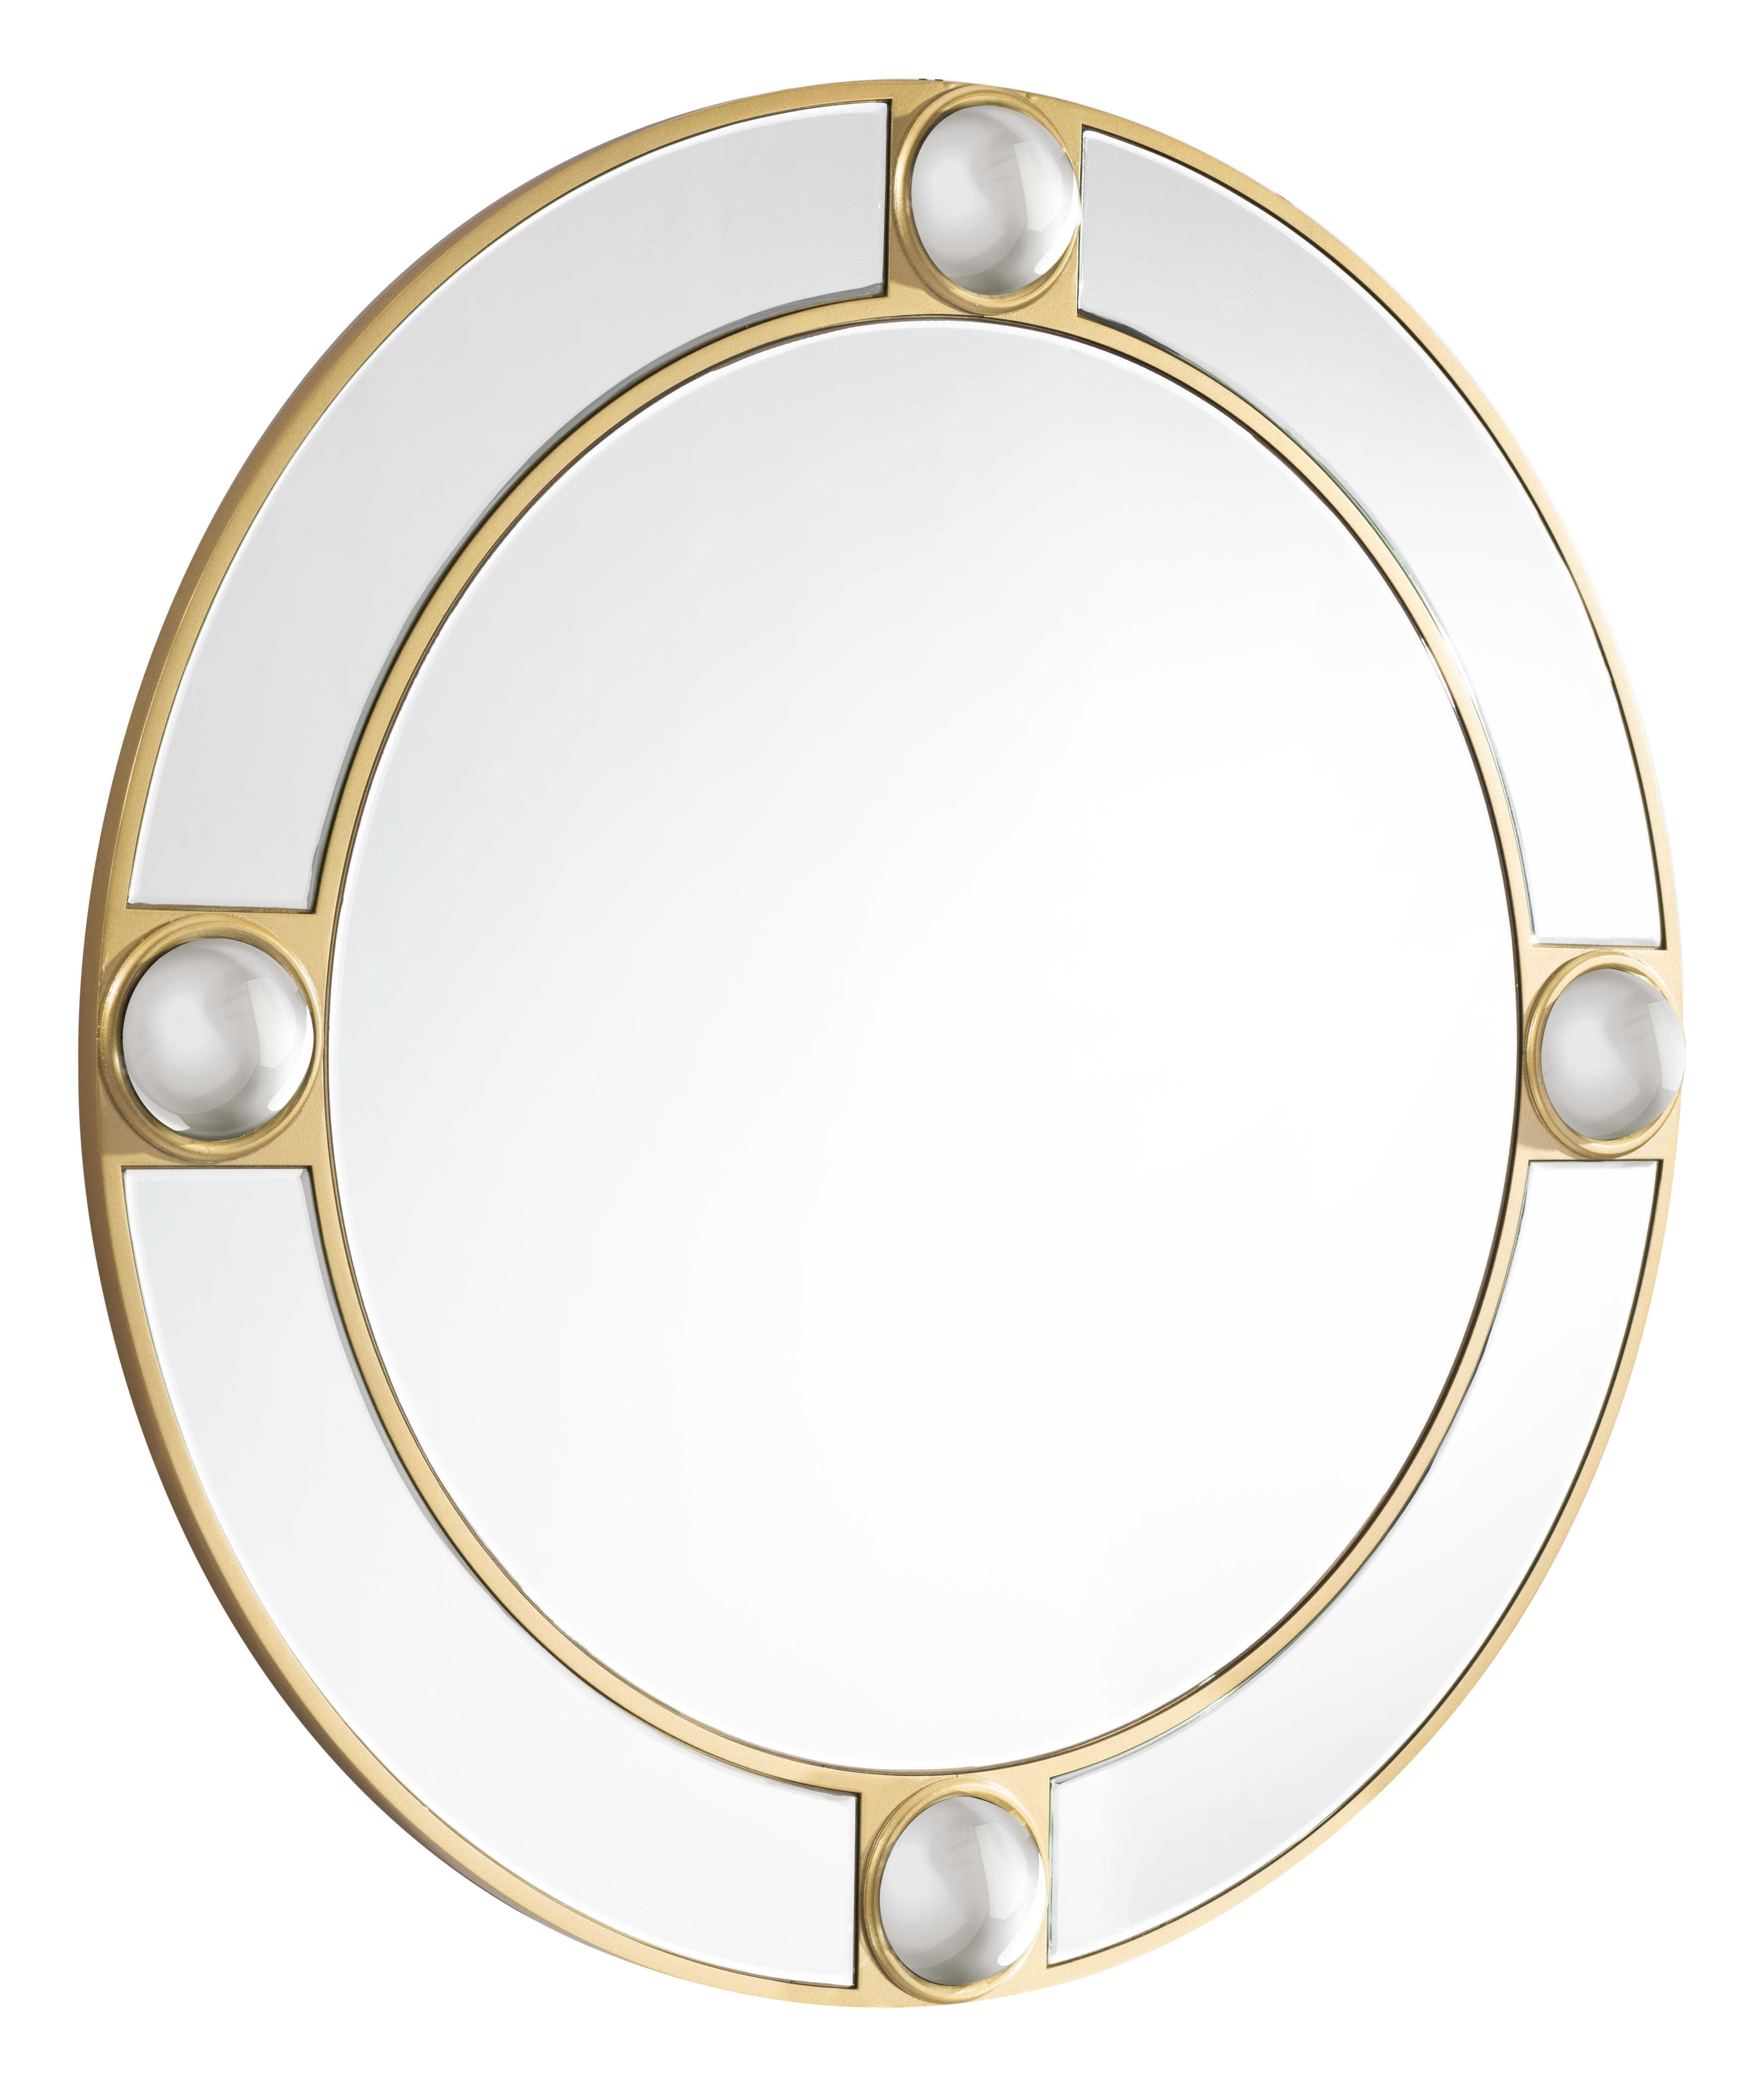 Lucite mirror finished in gold from Zuo Modern